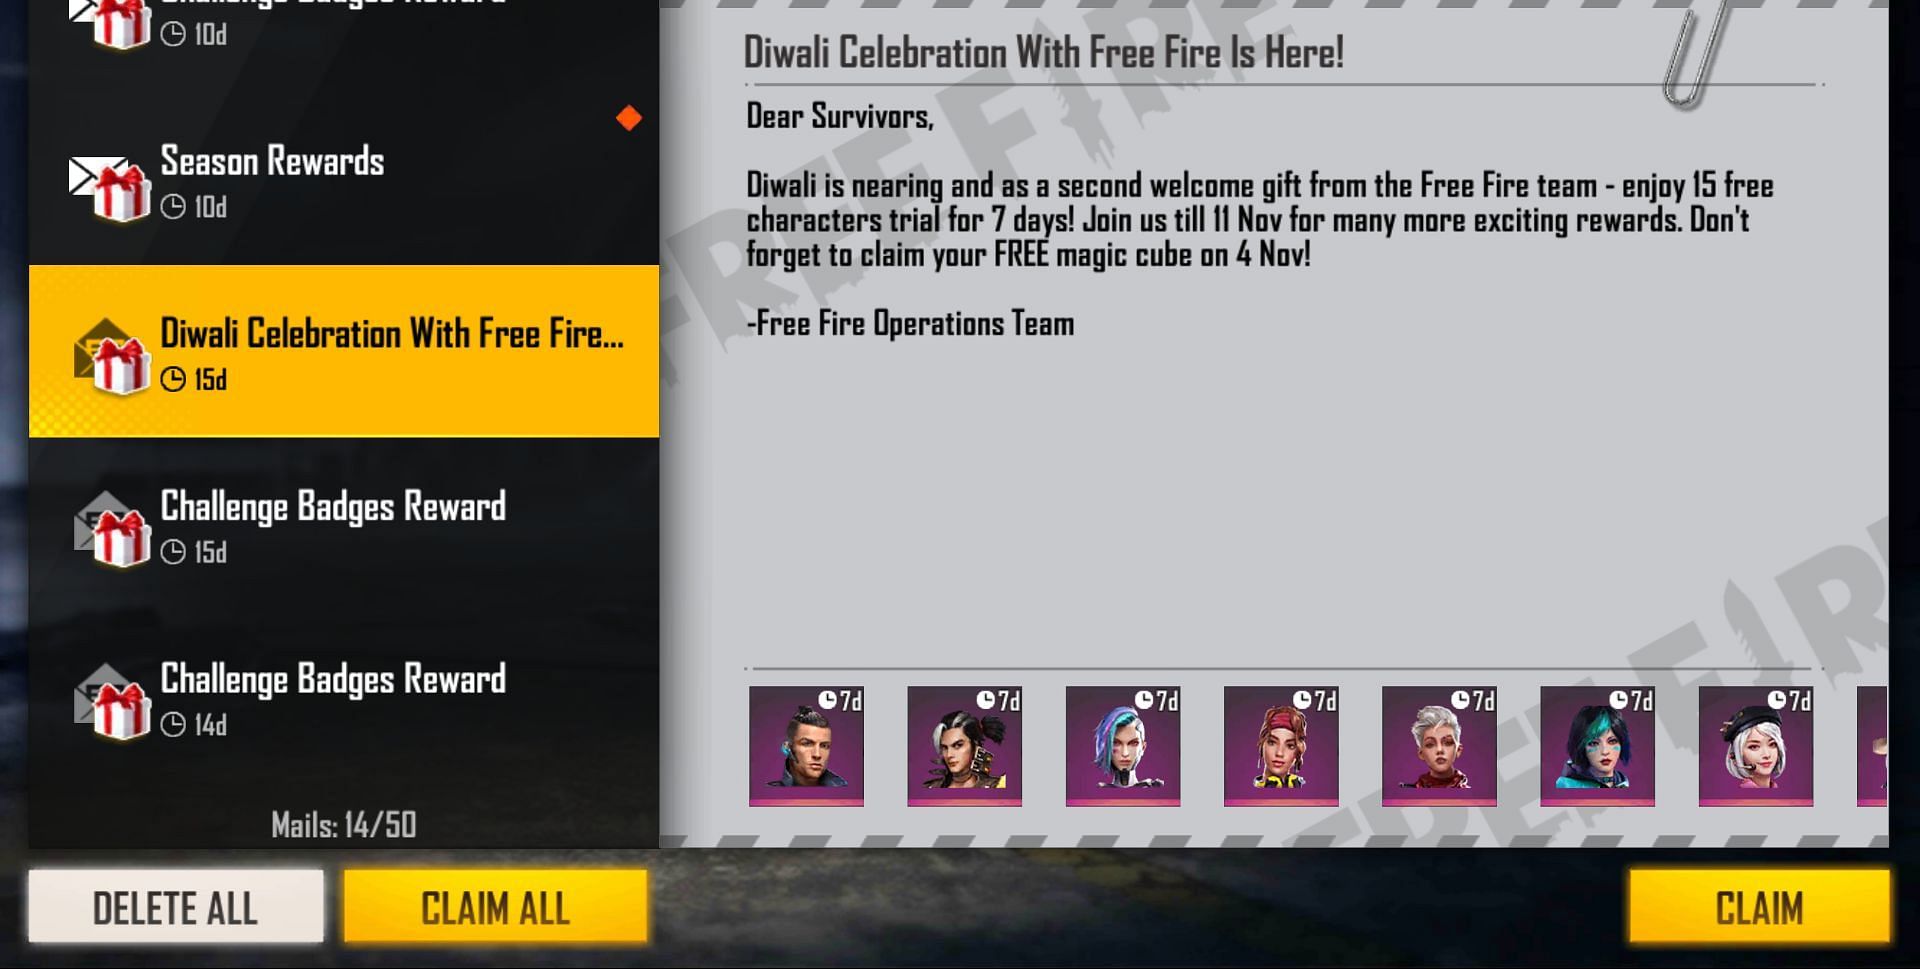 All the characters will be available for 7 days (Image via Free Fire)